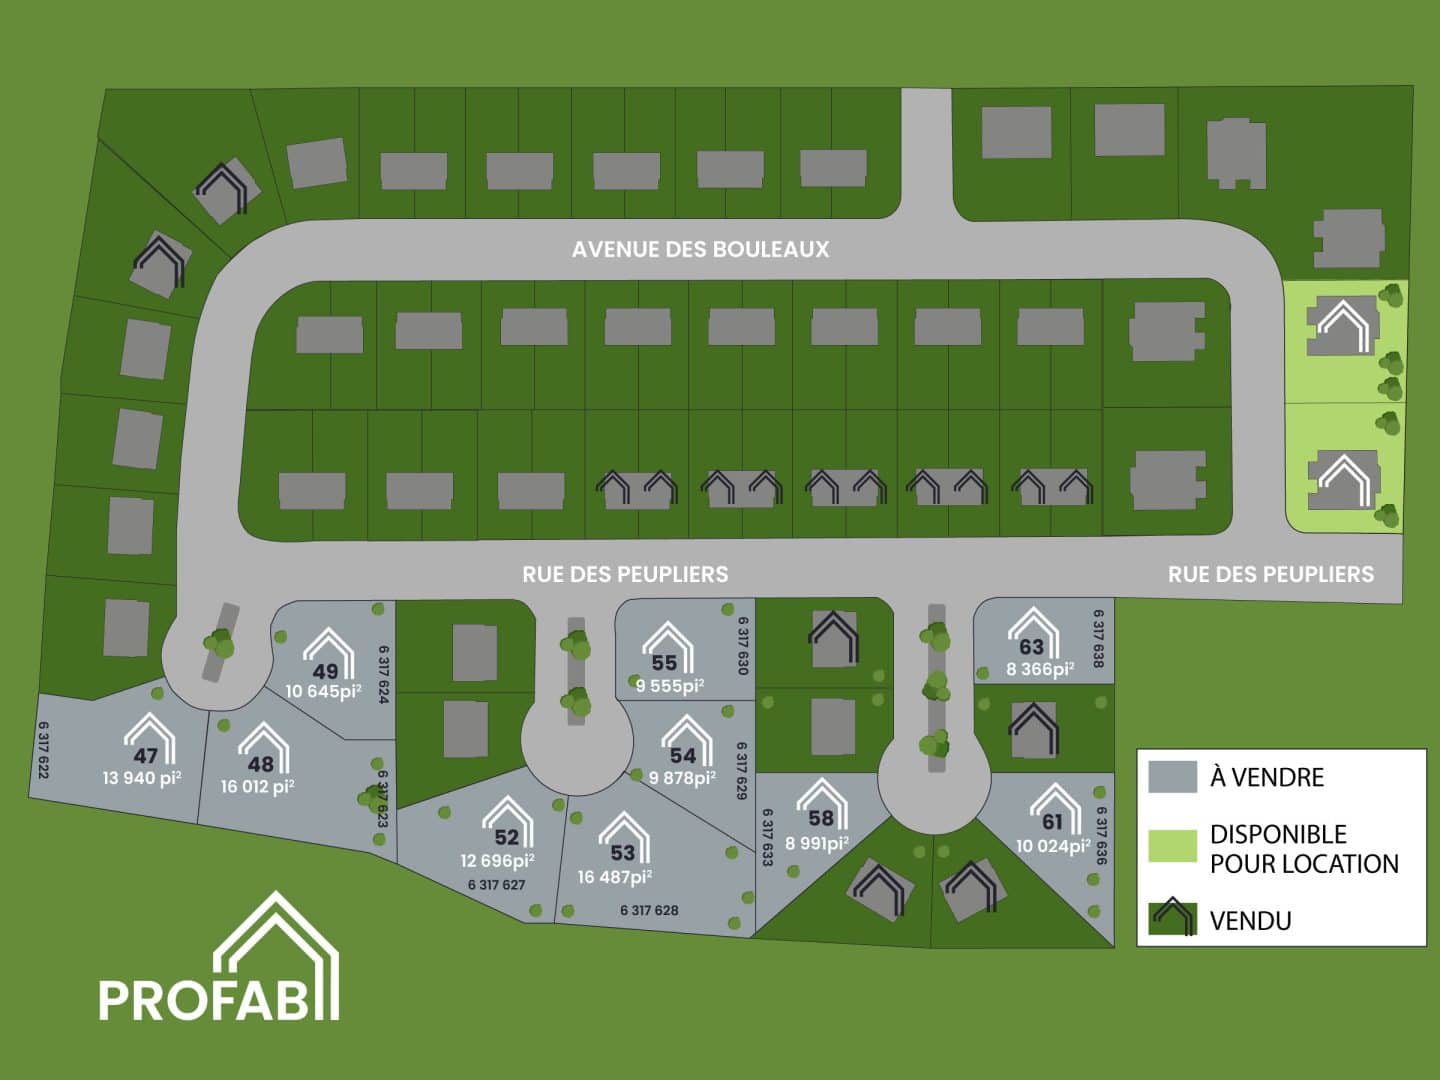 Vallée jonction 2D subdivision plan. Vacant lot number 53 for sale.